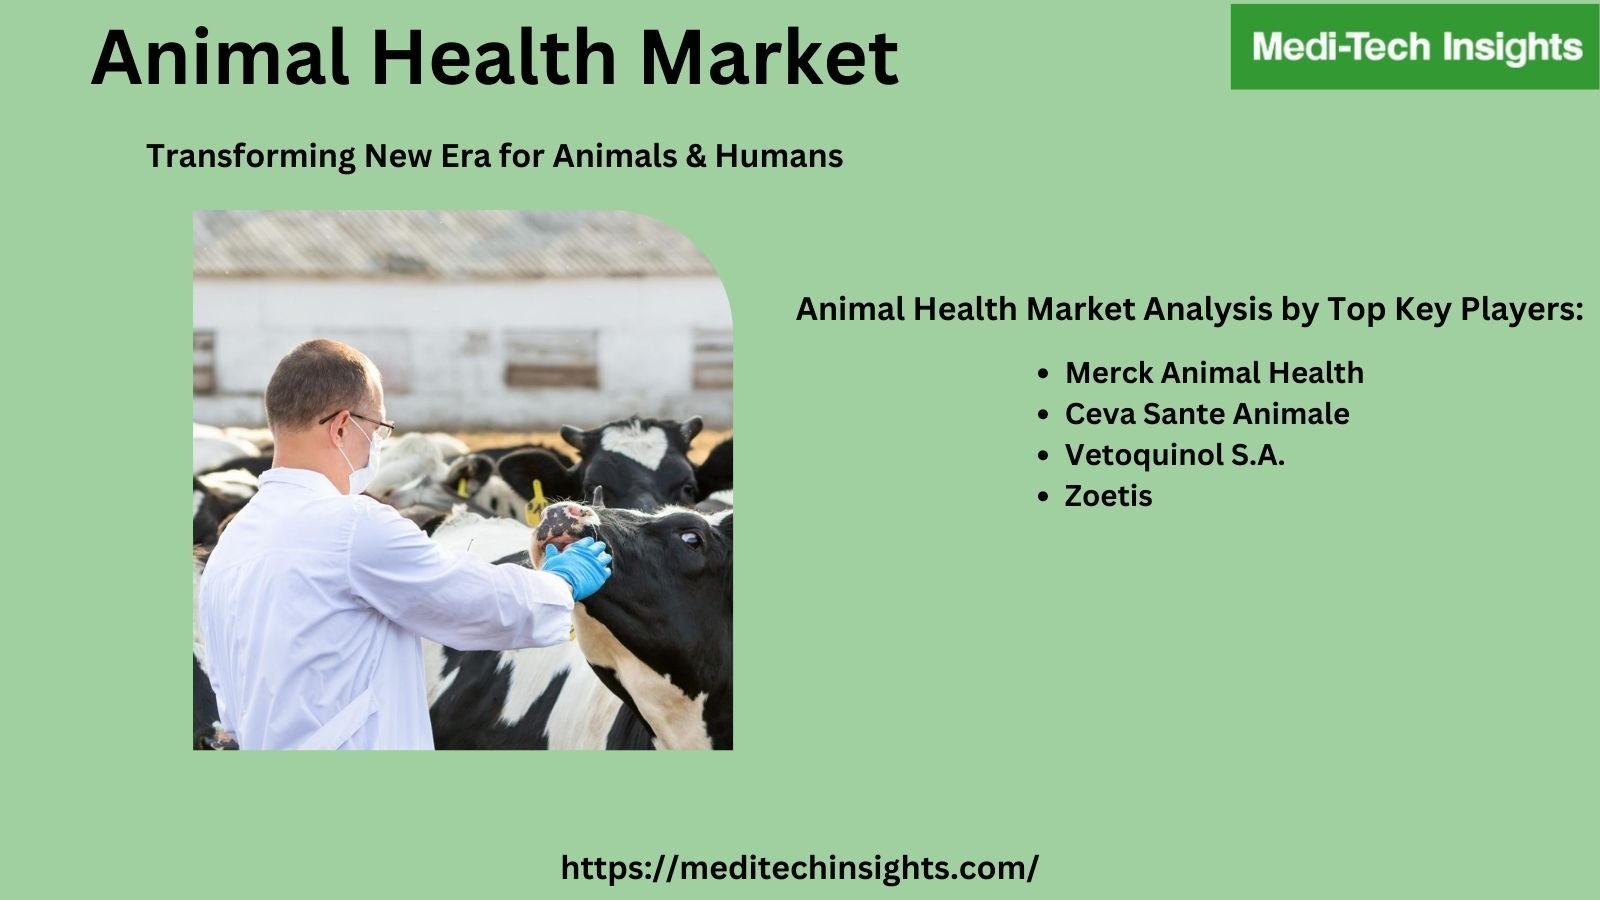 Animal Health Market is projected to increase at a 4% CAGR to reach $49.1 billion by 2026